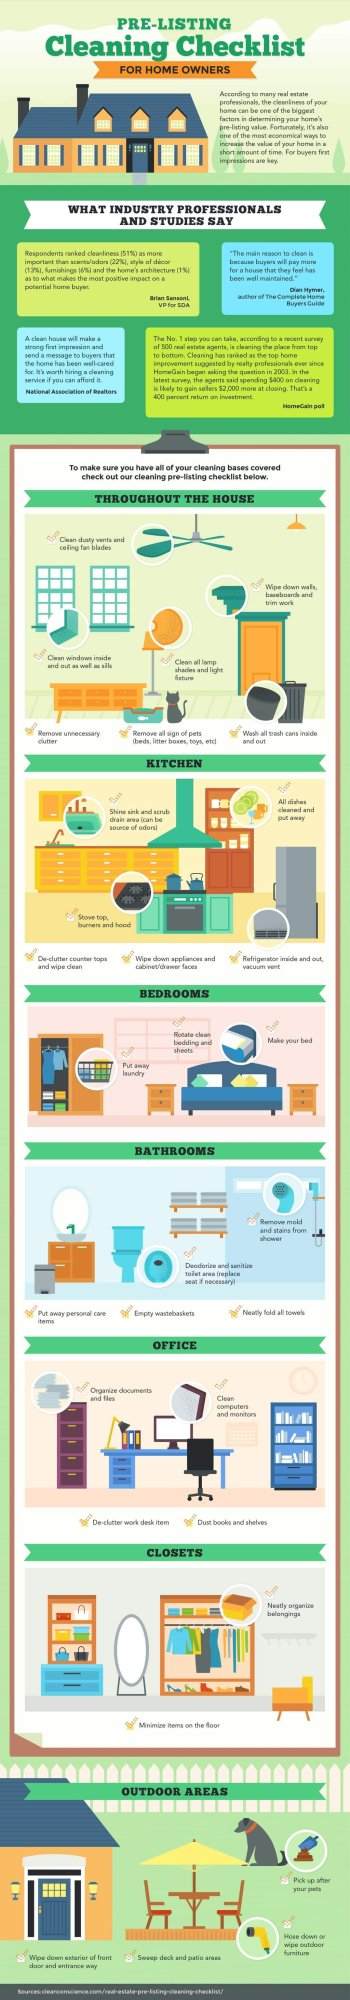 31 Great Cleaning Tips Pre-Sale Checklist For Your Home (Infographic) cleaning tips